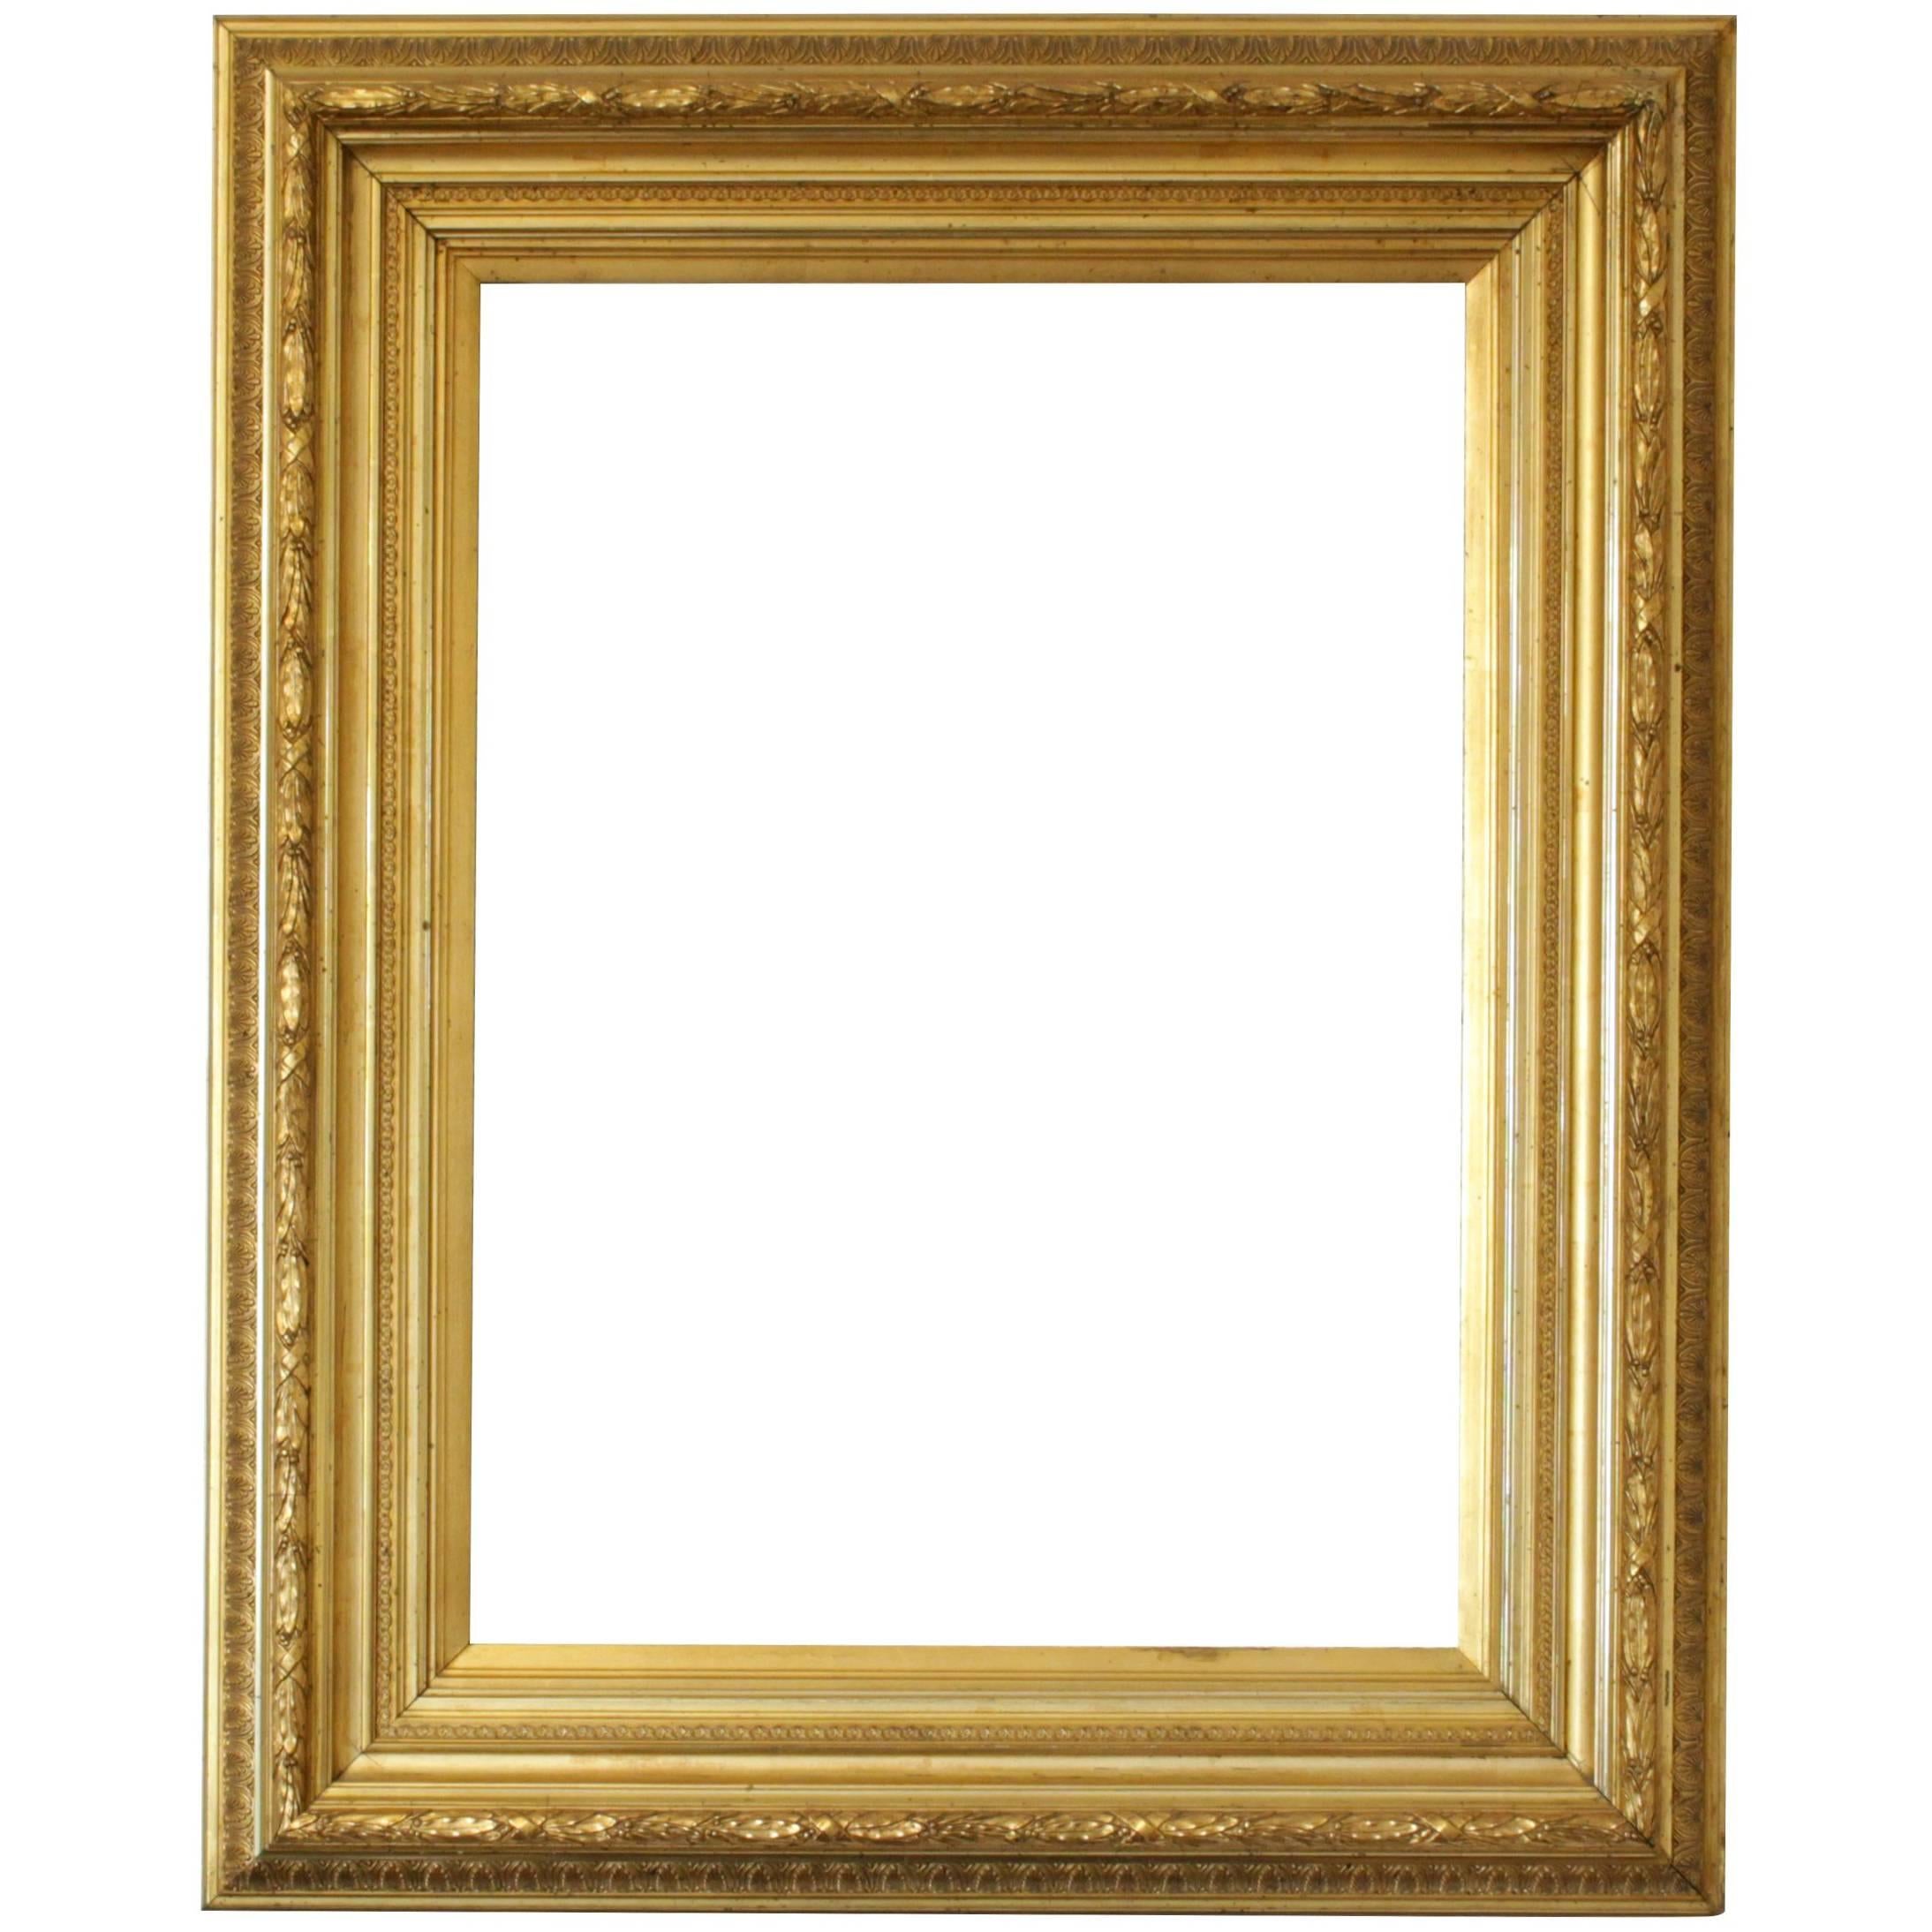 19th Century, Gold Biedermeier Frame for Mirror or Picture